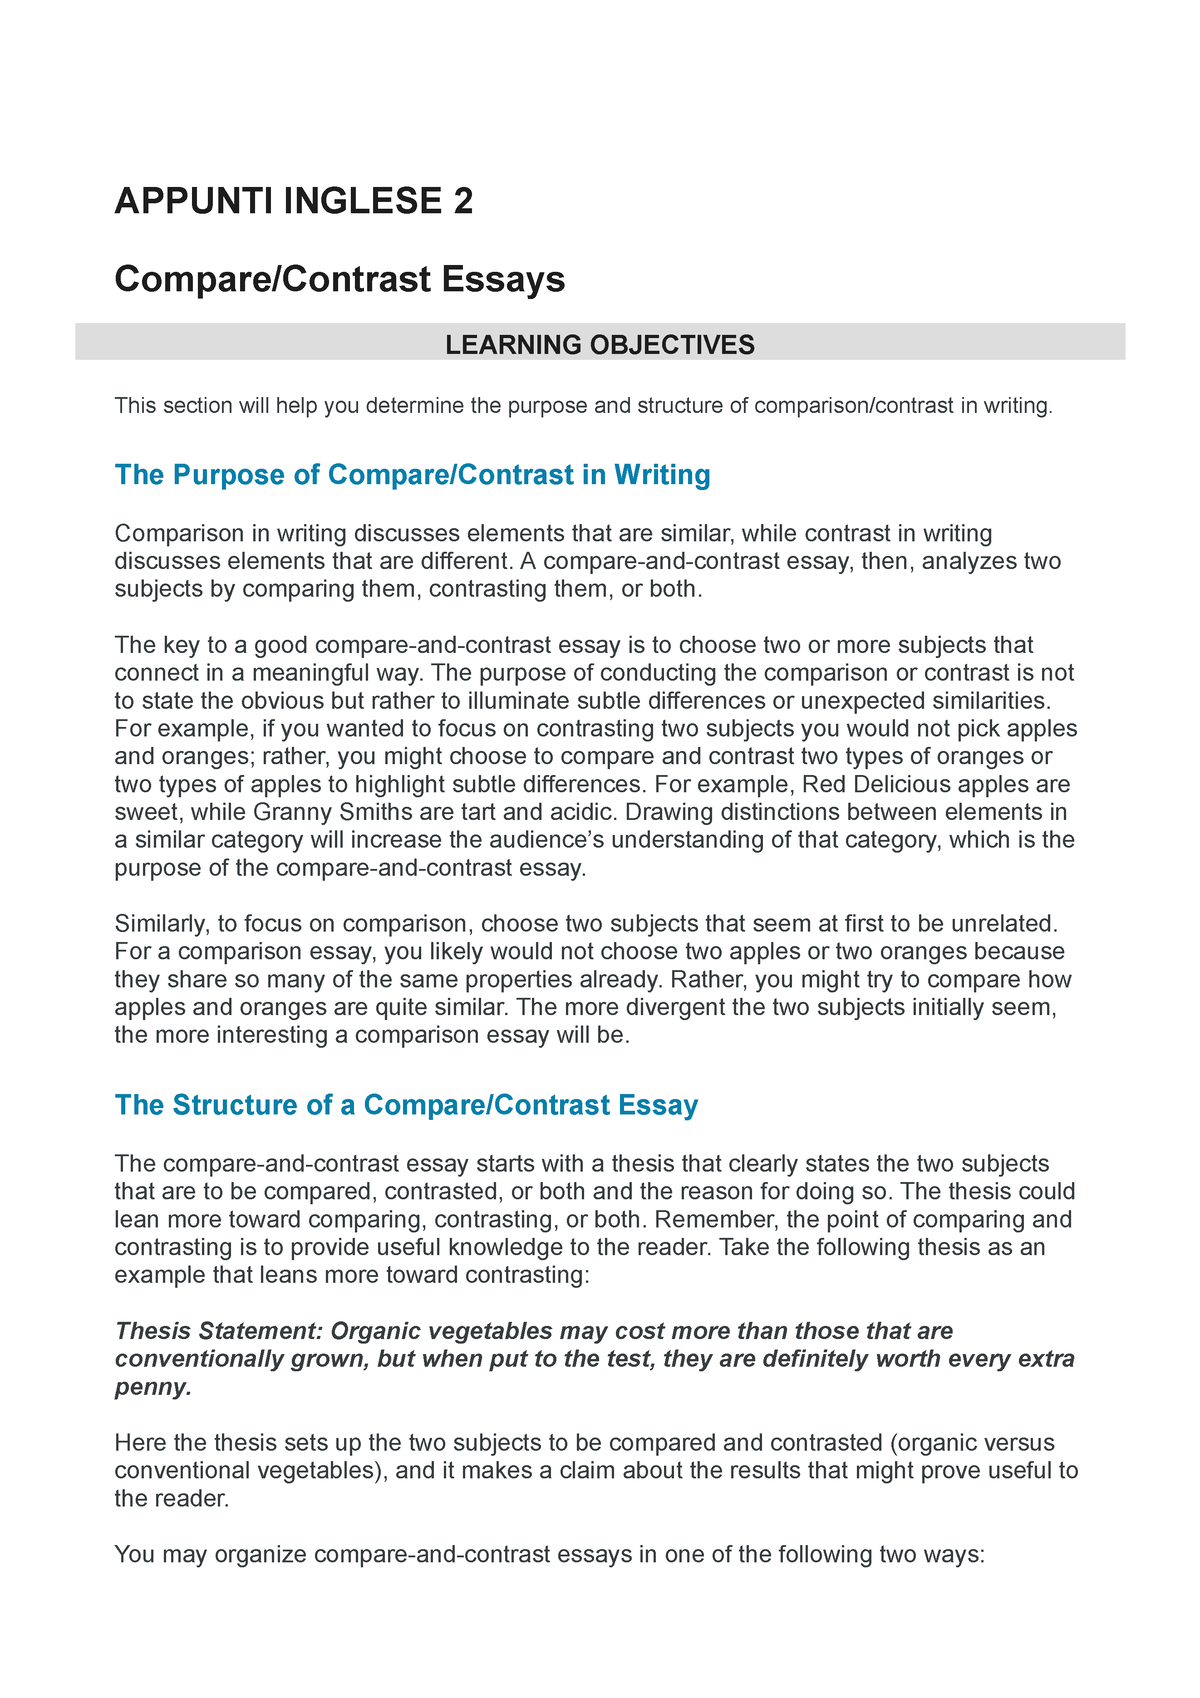 how to organize compare and contrast essay